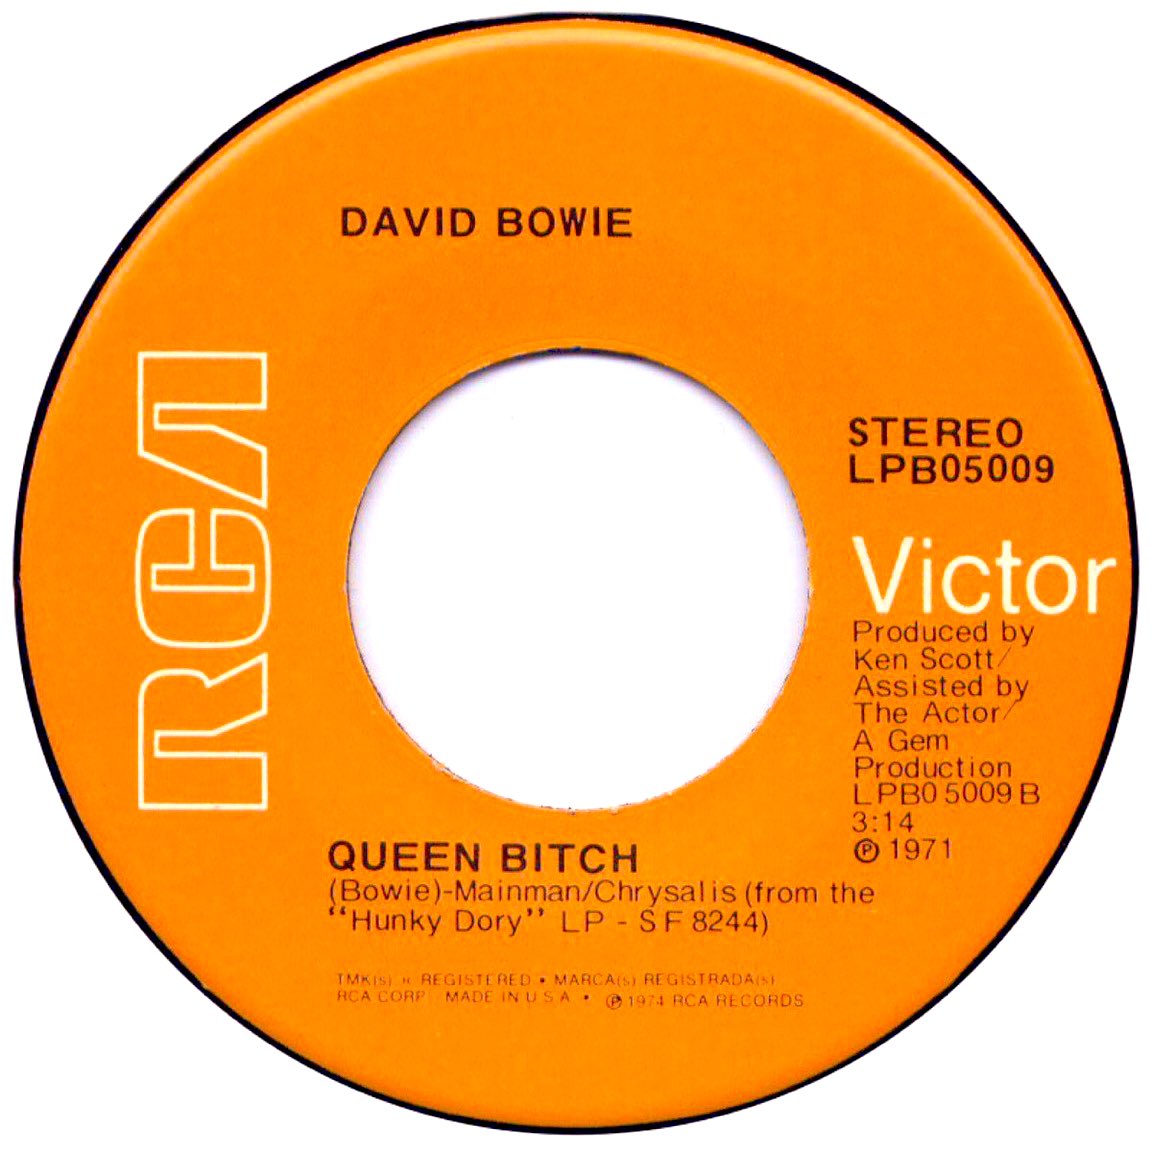 Queen Bitch - David Bowie - 1971 My heart's in the basement My weekend's at an all time low..